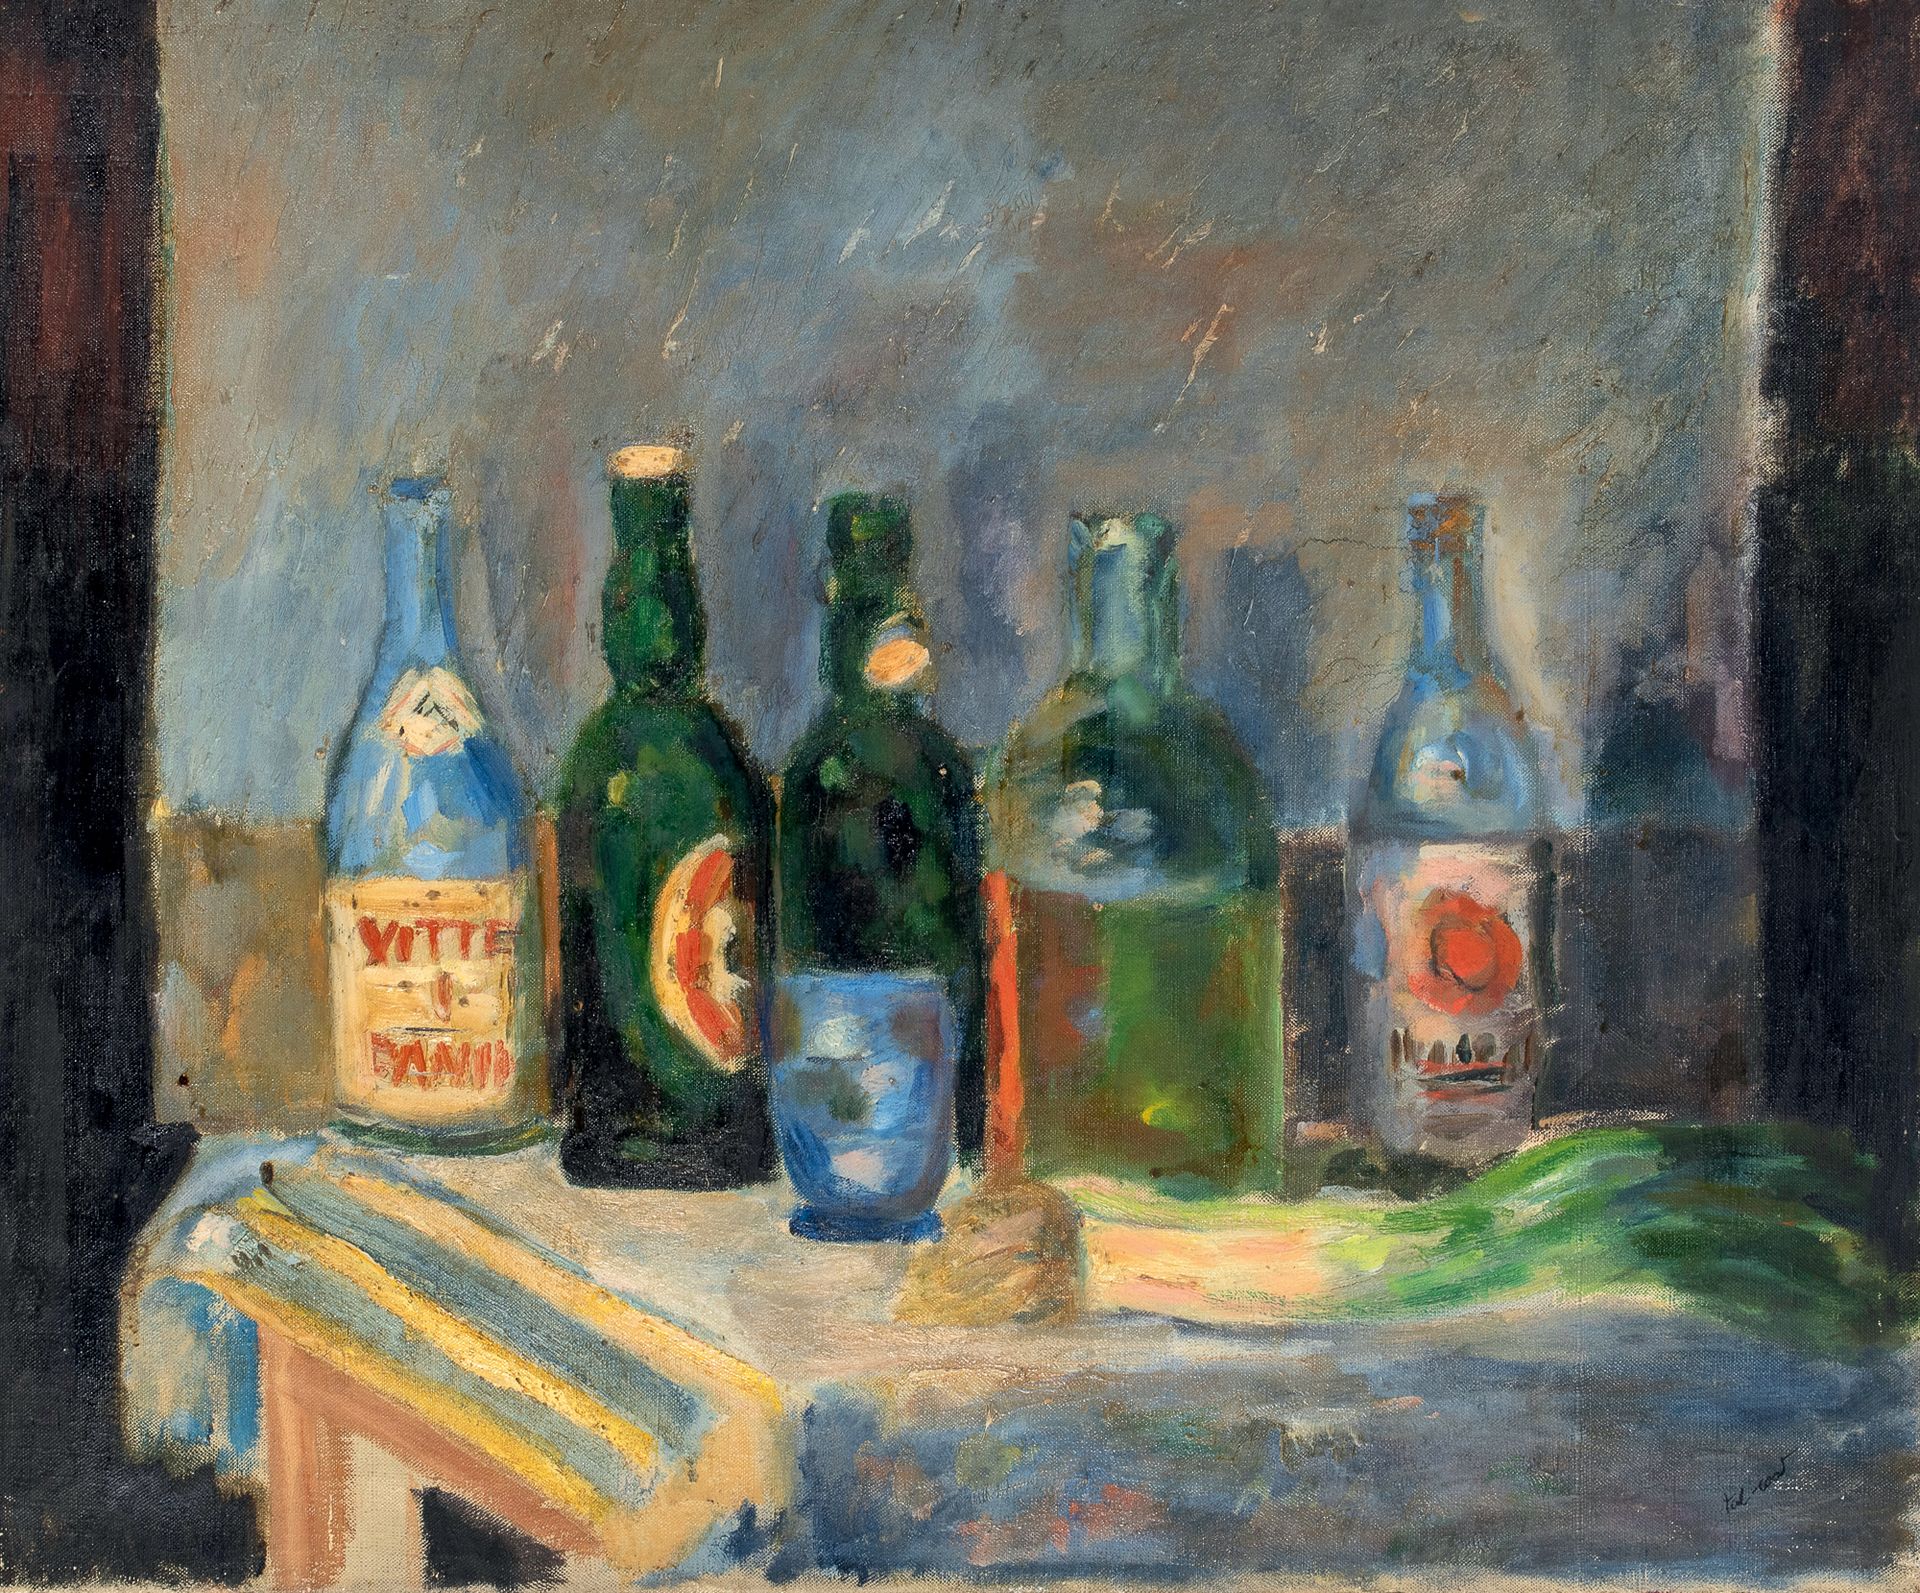 PIERRE TAL COAT (1905-1985) - Still life with bottles, 1928
Oil on canvas, signe&hellip;